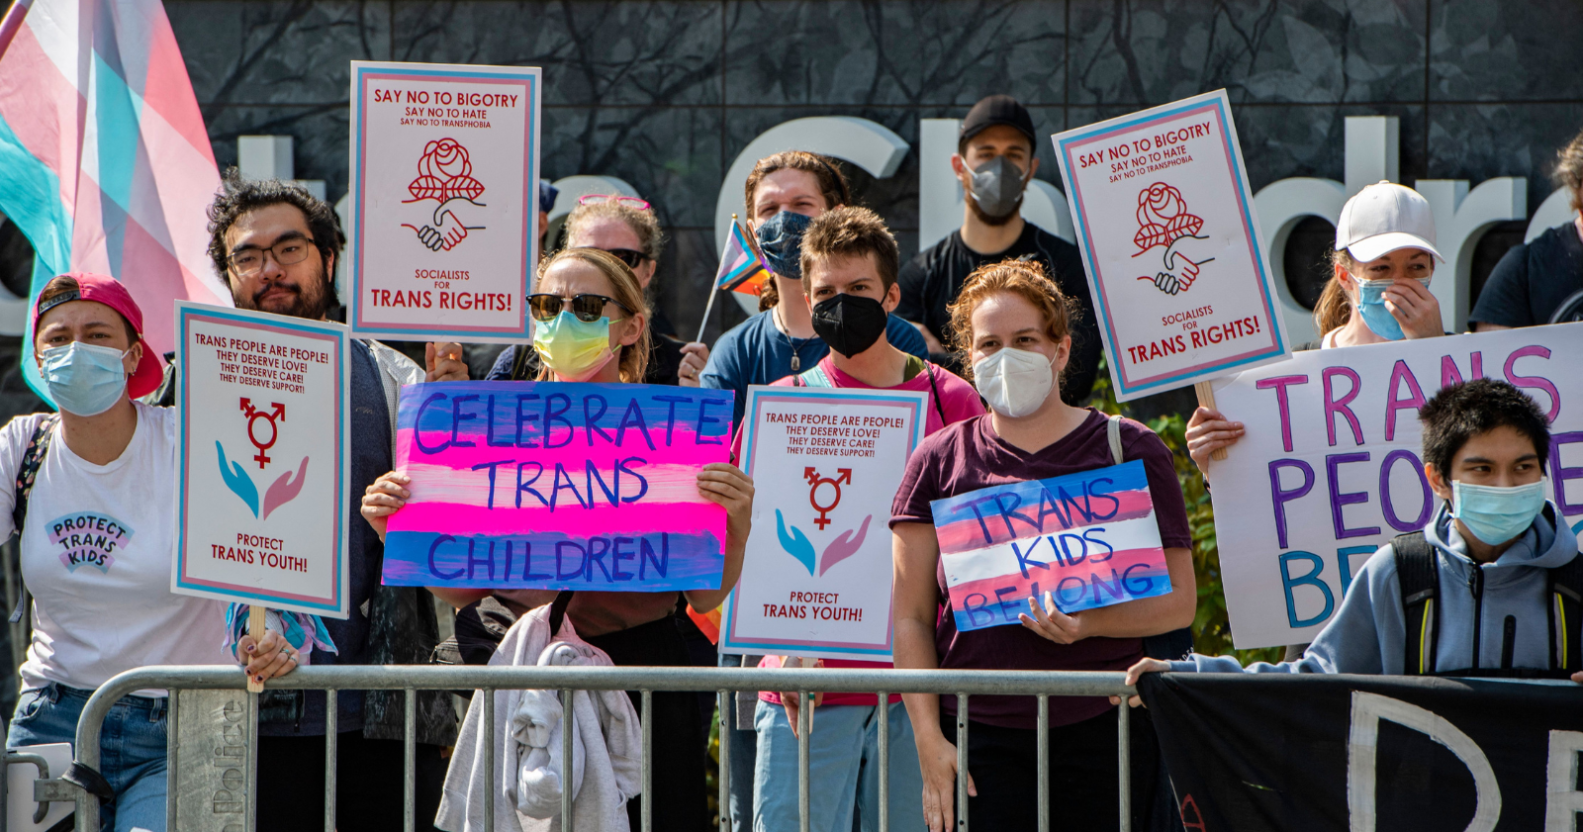 Members of a pro-LGBTQ+ protest wave trans-positive signs, as well as the pink, blue, and white trans flag.